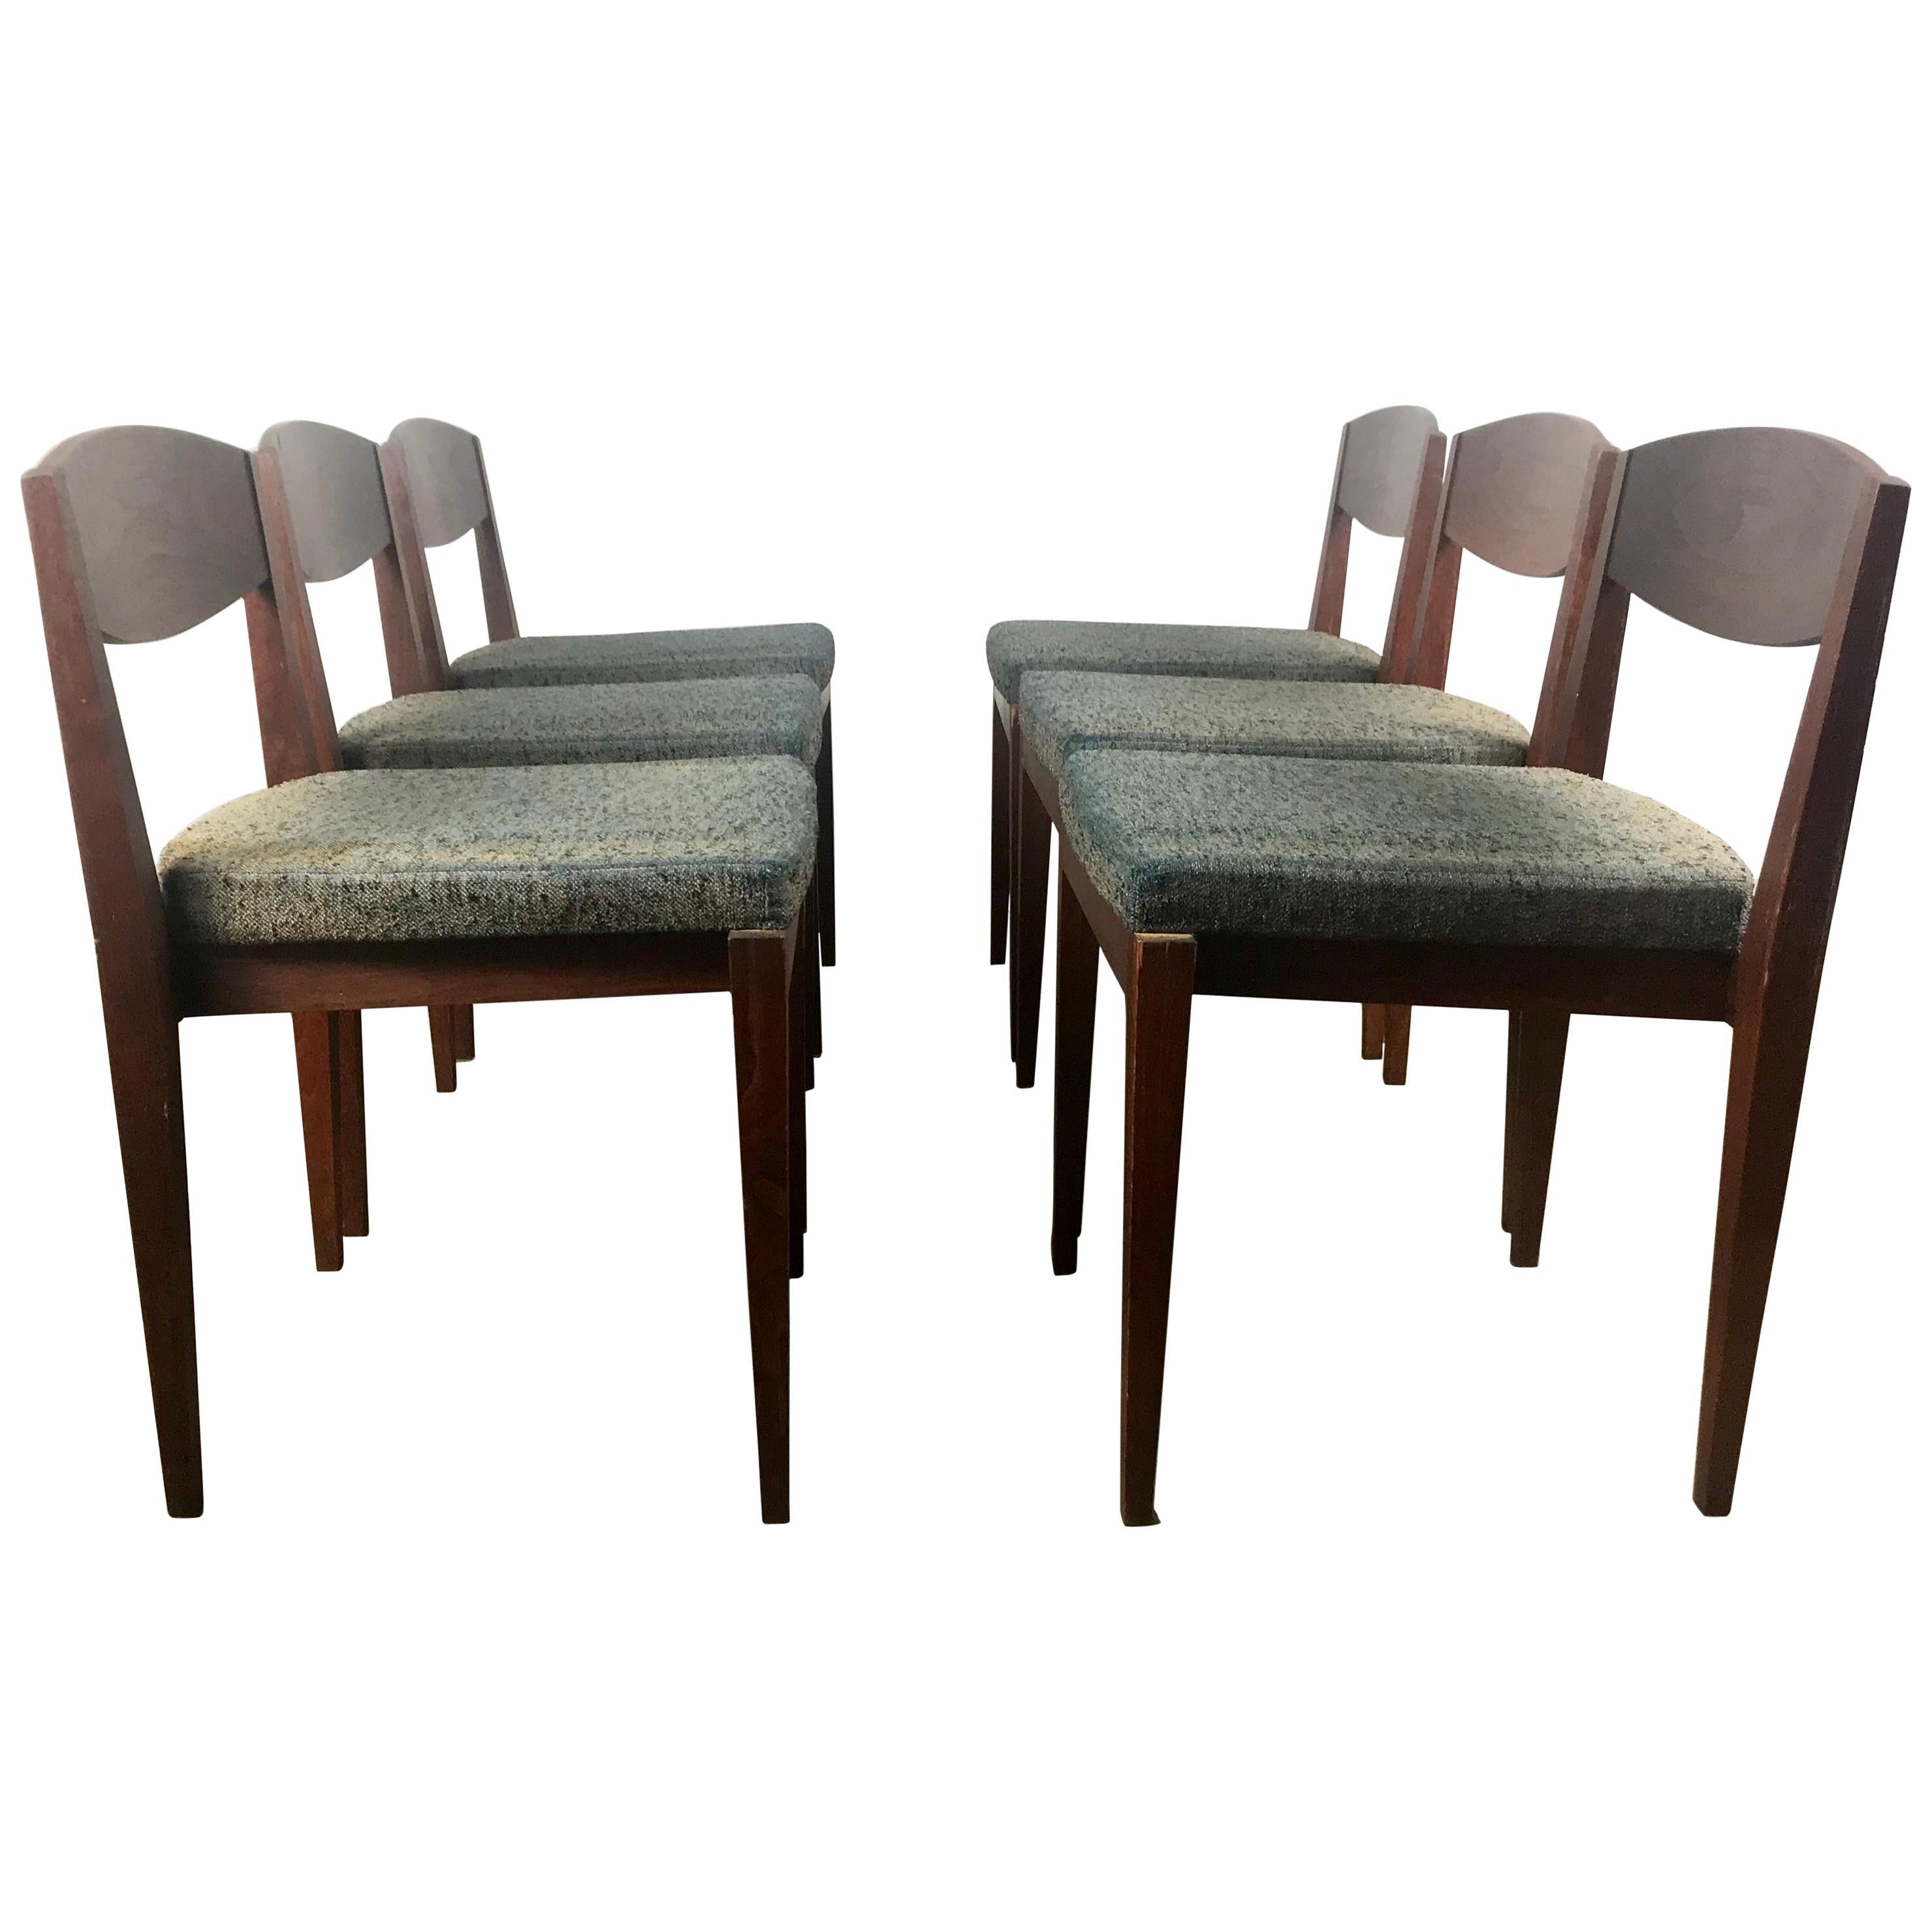 Unusual Set of 6 American Modernist Dining Chairs, Architectural Design For Sale